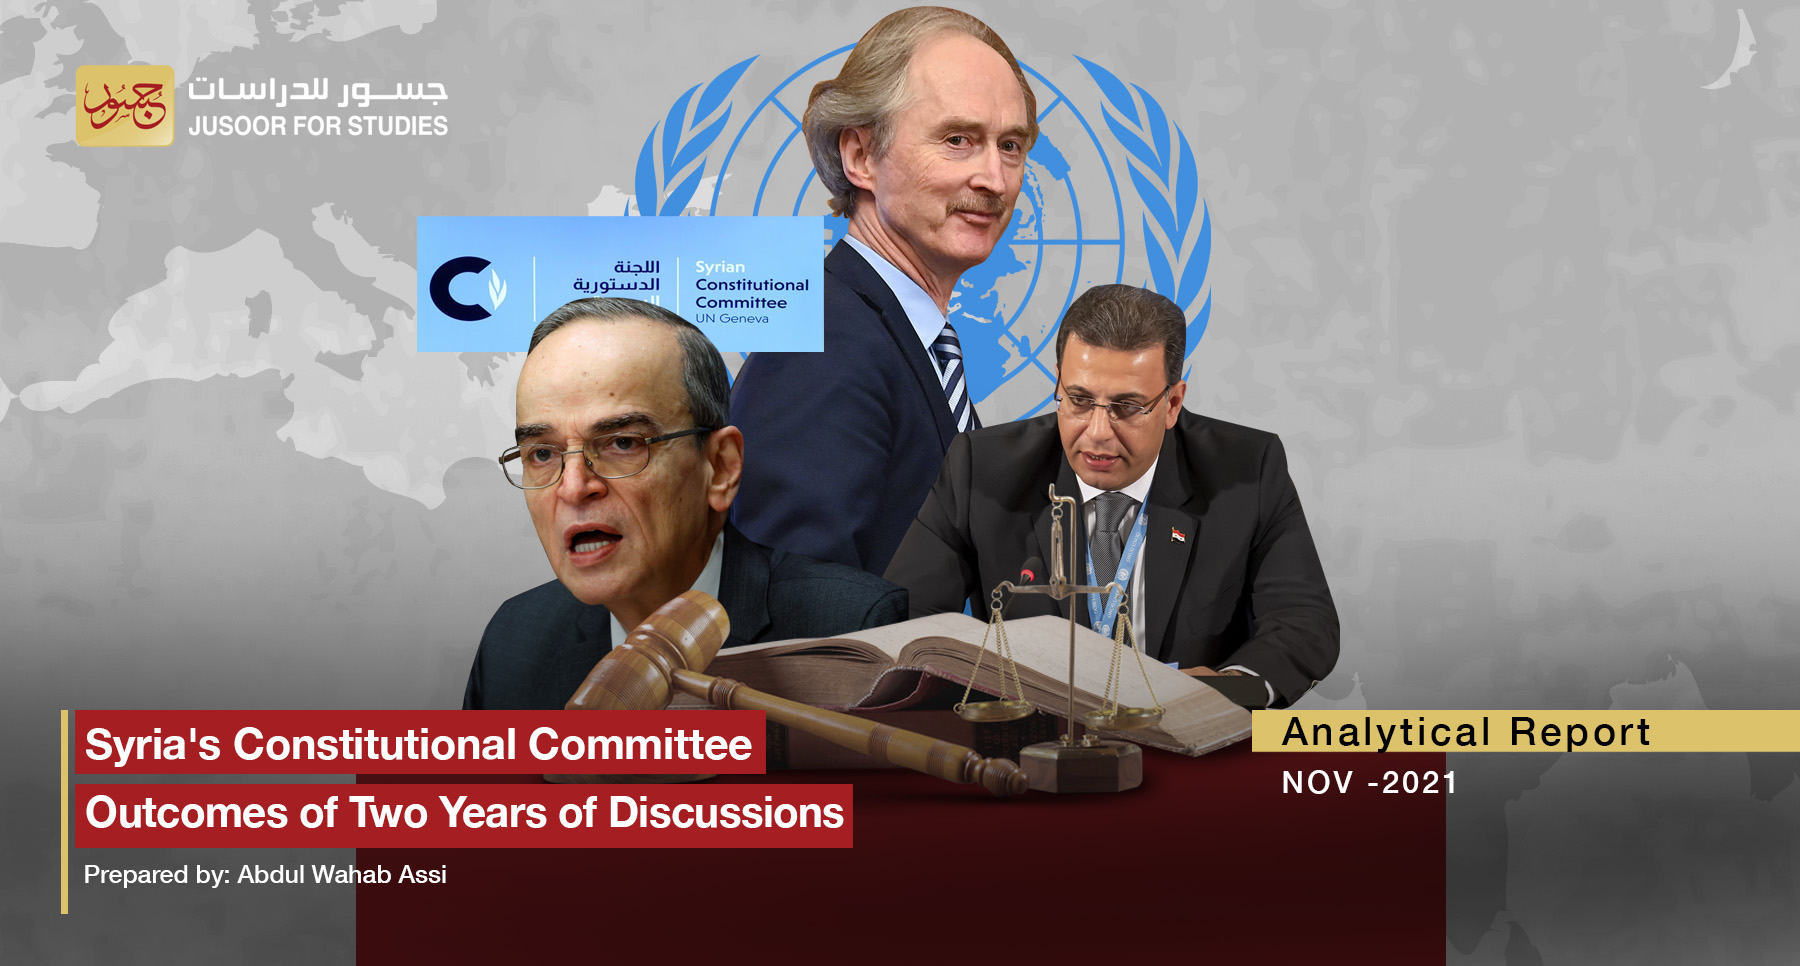 Syria's Constitutional Committee: Outcomes of Two Years of Discussions